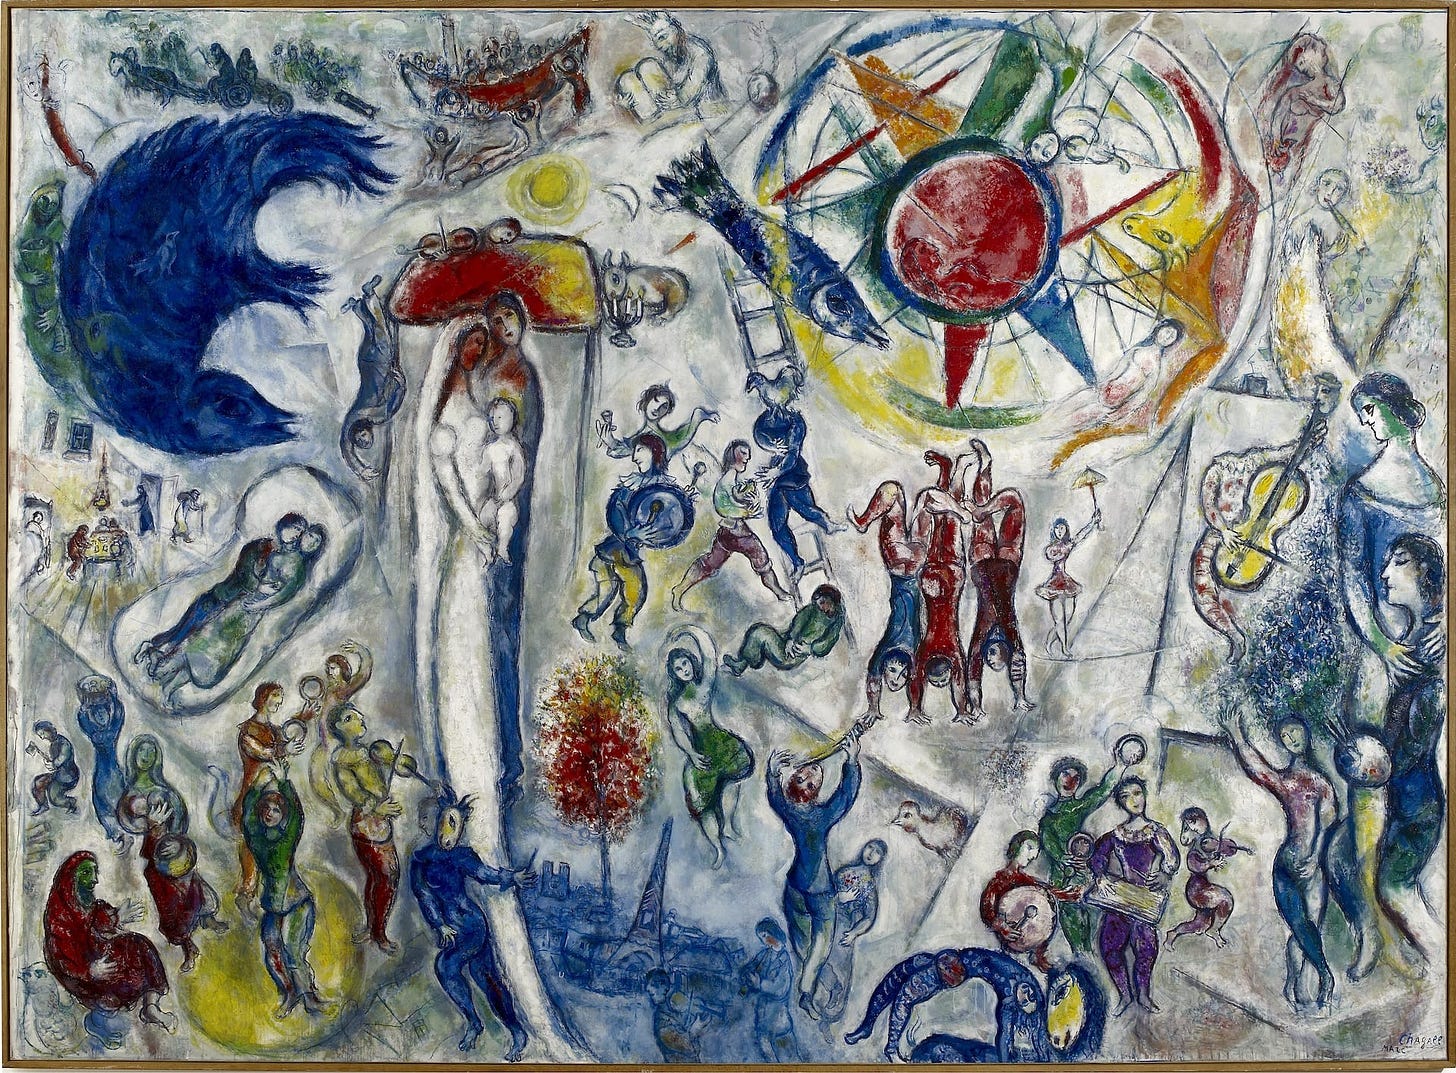 the painting, 'La Vie', by Marc Chagall. the painting is characteristic of Chagall's impressionistic and dreamlike style. in the centre-left, a couple, one in a wedding gown, hold a child. in the top centre-right, there is a red sun-like orb, surrounded by geometric shapes, lines, and a fish. various figures fill the canvas, seemingly circus performers, other couples, musicians, as well as images from the Hebrew Bible, such as Moses with the tablets of the law, the burning bush, and others. the background is white, and the figures are in a great variety of different colours - blues, reds, greens, and yellows.